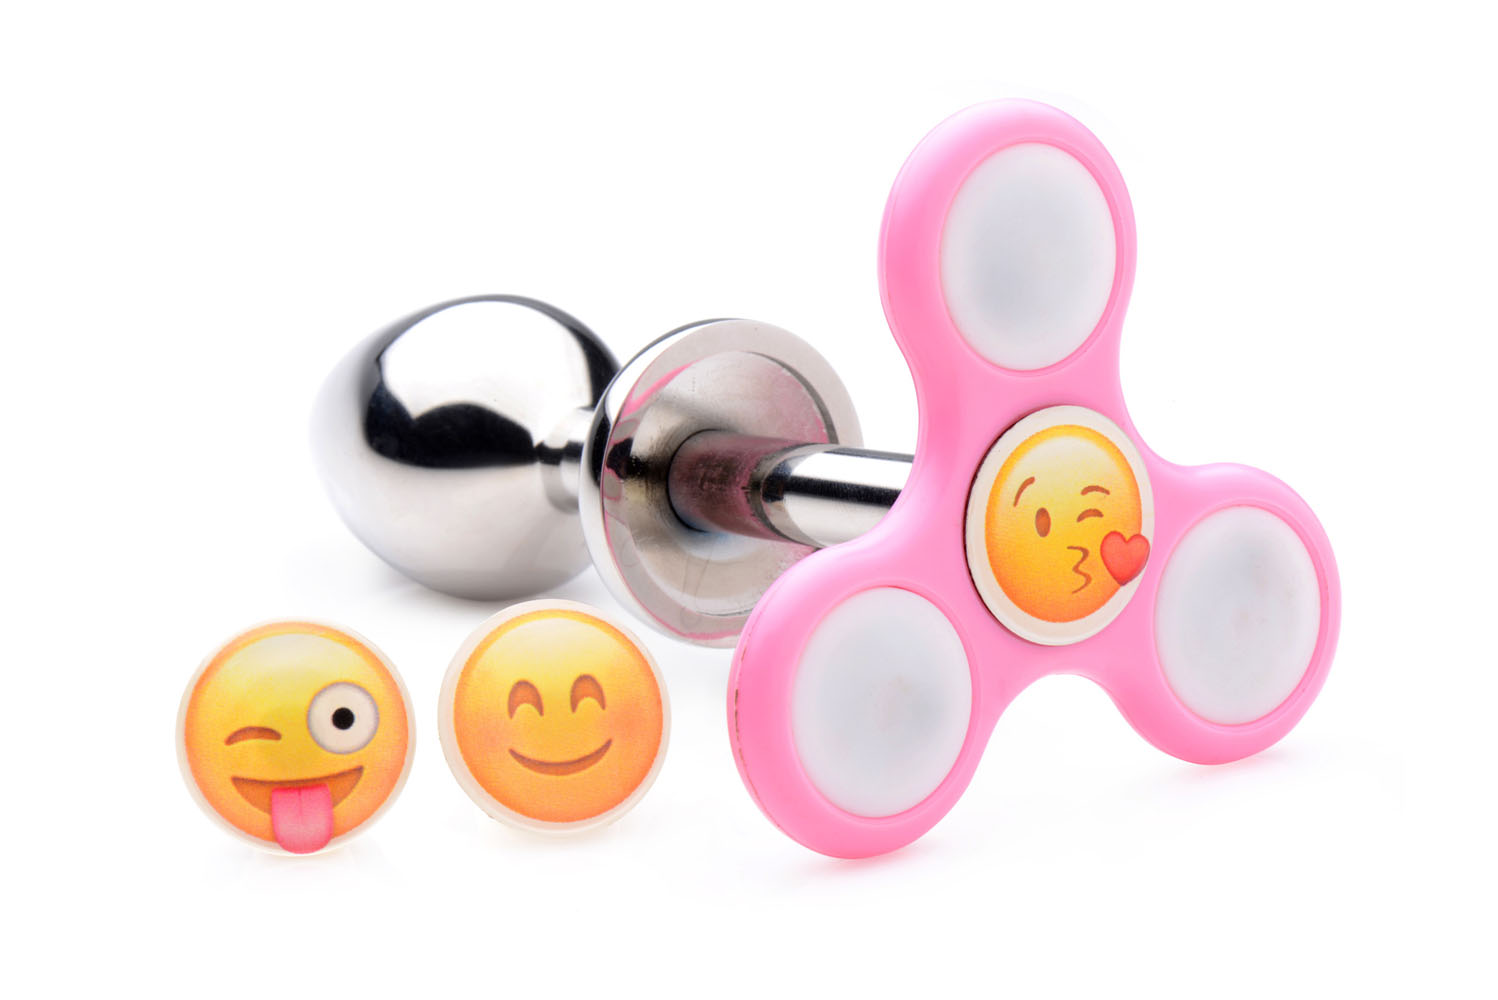 Frisky Happy Ass Spinner Fidget Spinner Anal Plug With 3 Magnetic Icons